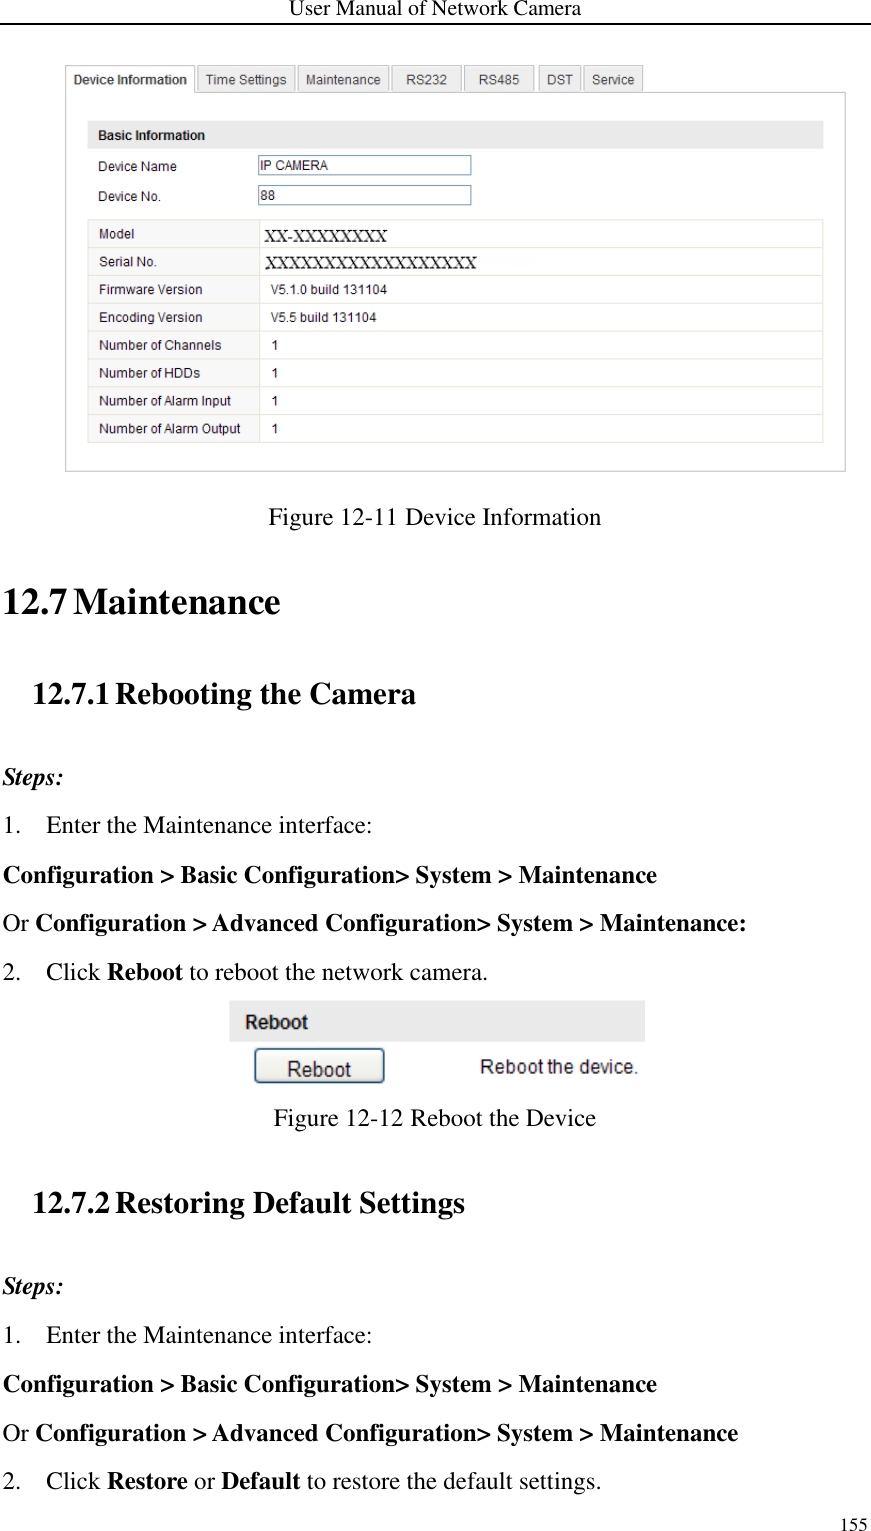 User Manual of Network Camera 155   Figure 12-11 Device Information 12.7 Maintenance 12.7.1 Rebooting the Camera Steps: 1. Enter the Maintenance interface: Configuration &gt; Basic Configuration&gt; System &gt; Maintenance   Or Configuration &gt; Advanced Configuration&gt; System &gt; Maintenance: 2. Click Reboot to reboot the network camera.  Figure 12-12 Reboot the Device 12.7.2 Restoring Default Settings Steps: 1. Enter the Maintenance interface: Configuration &gt; Basic Configuration&gt; System &gt; Maintenance   Or Configuration &gt; Advanced Configuration&gt; System &gt; Maintenance 2. Click Restore or Default to restore the default settings. 